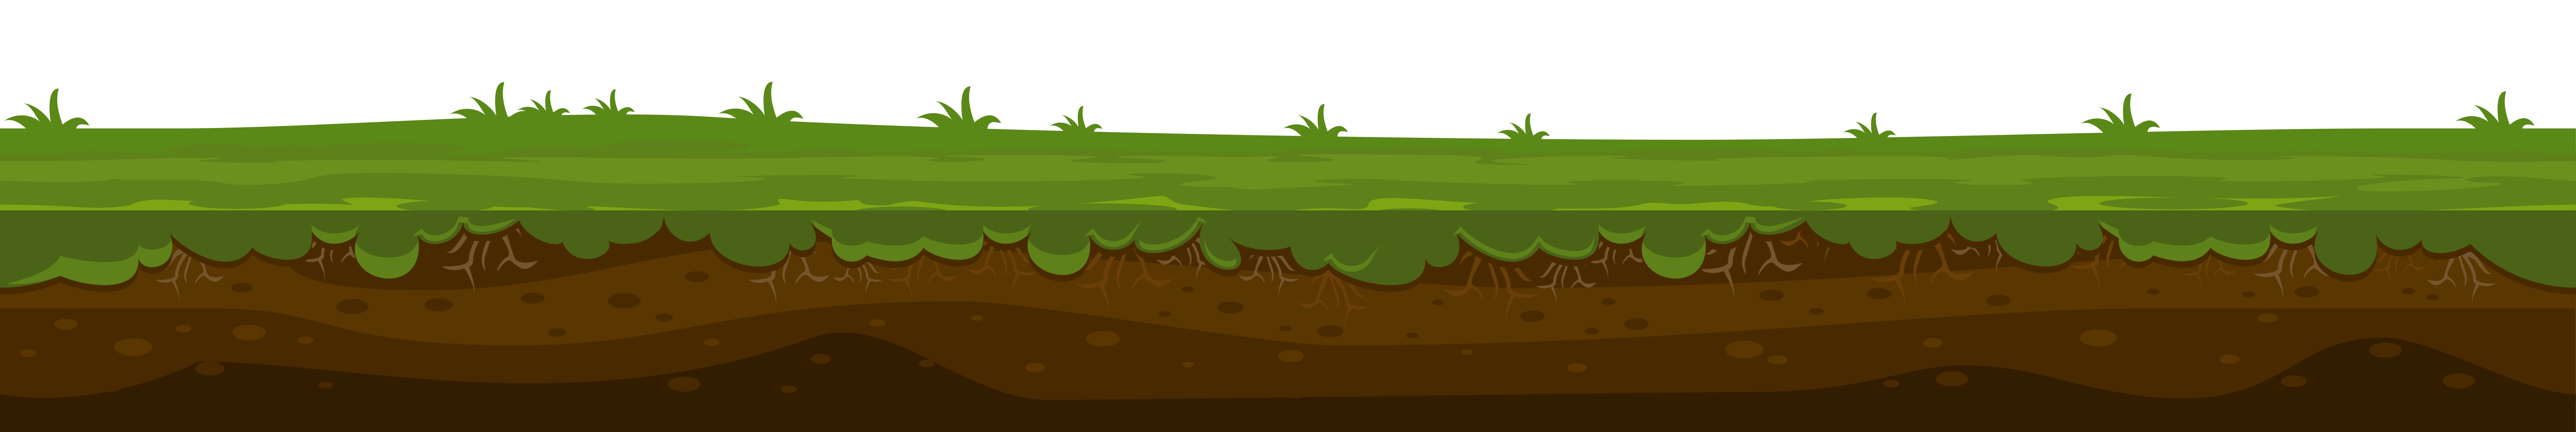 Grounds clipart - Clipground